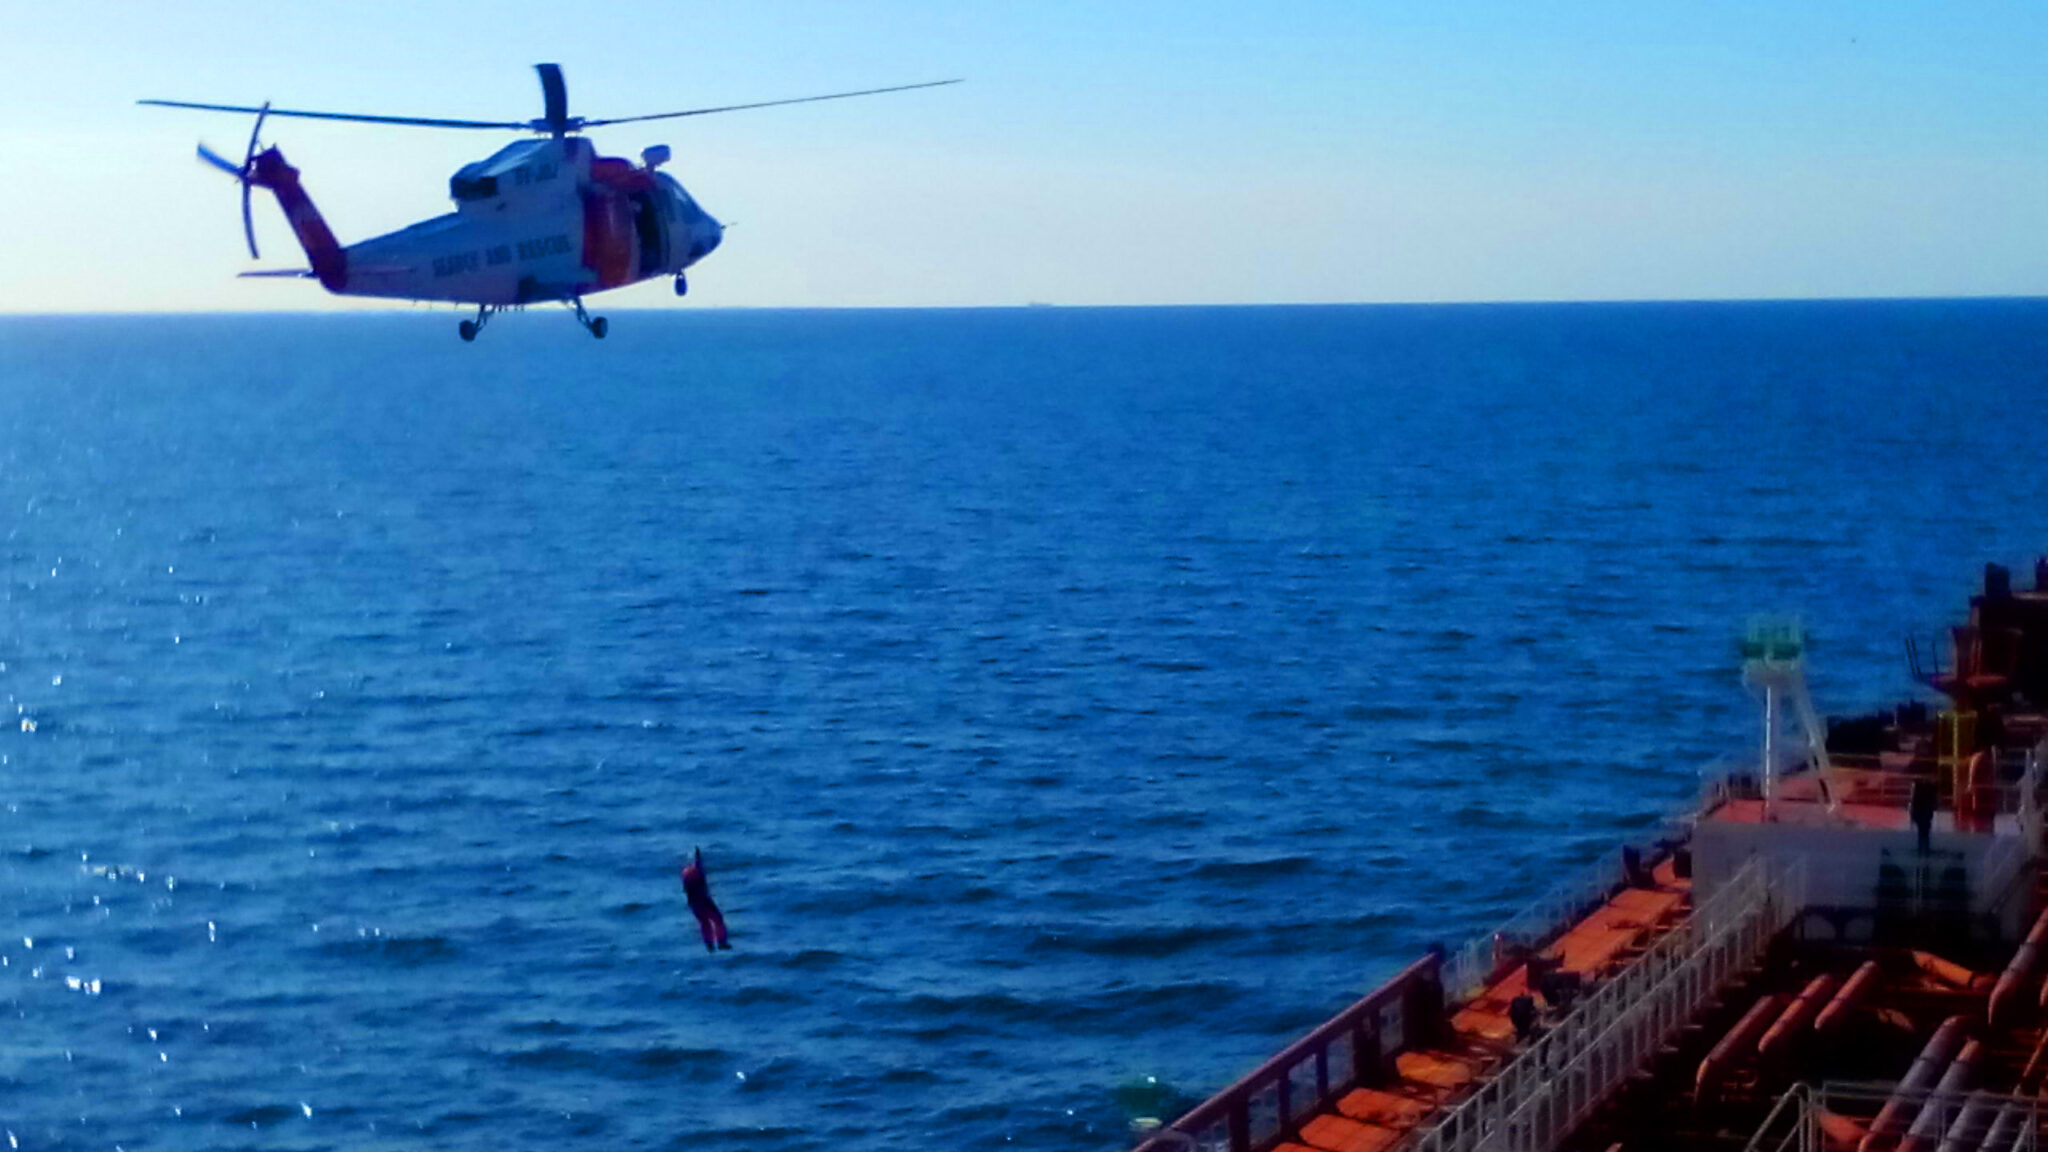 A rescuer hanging down the winch as the helicopter approaches to the tanker vessel's main deck.